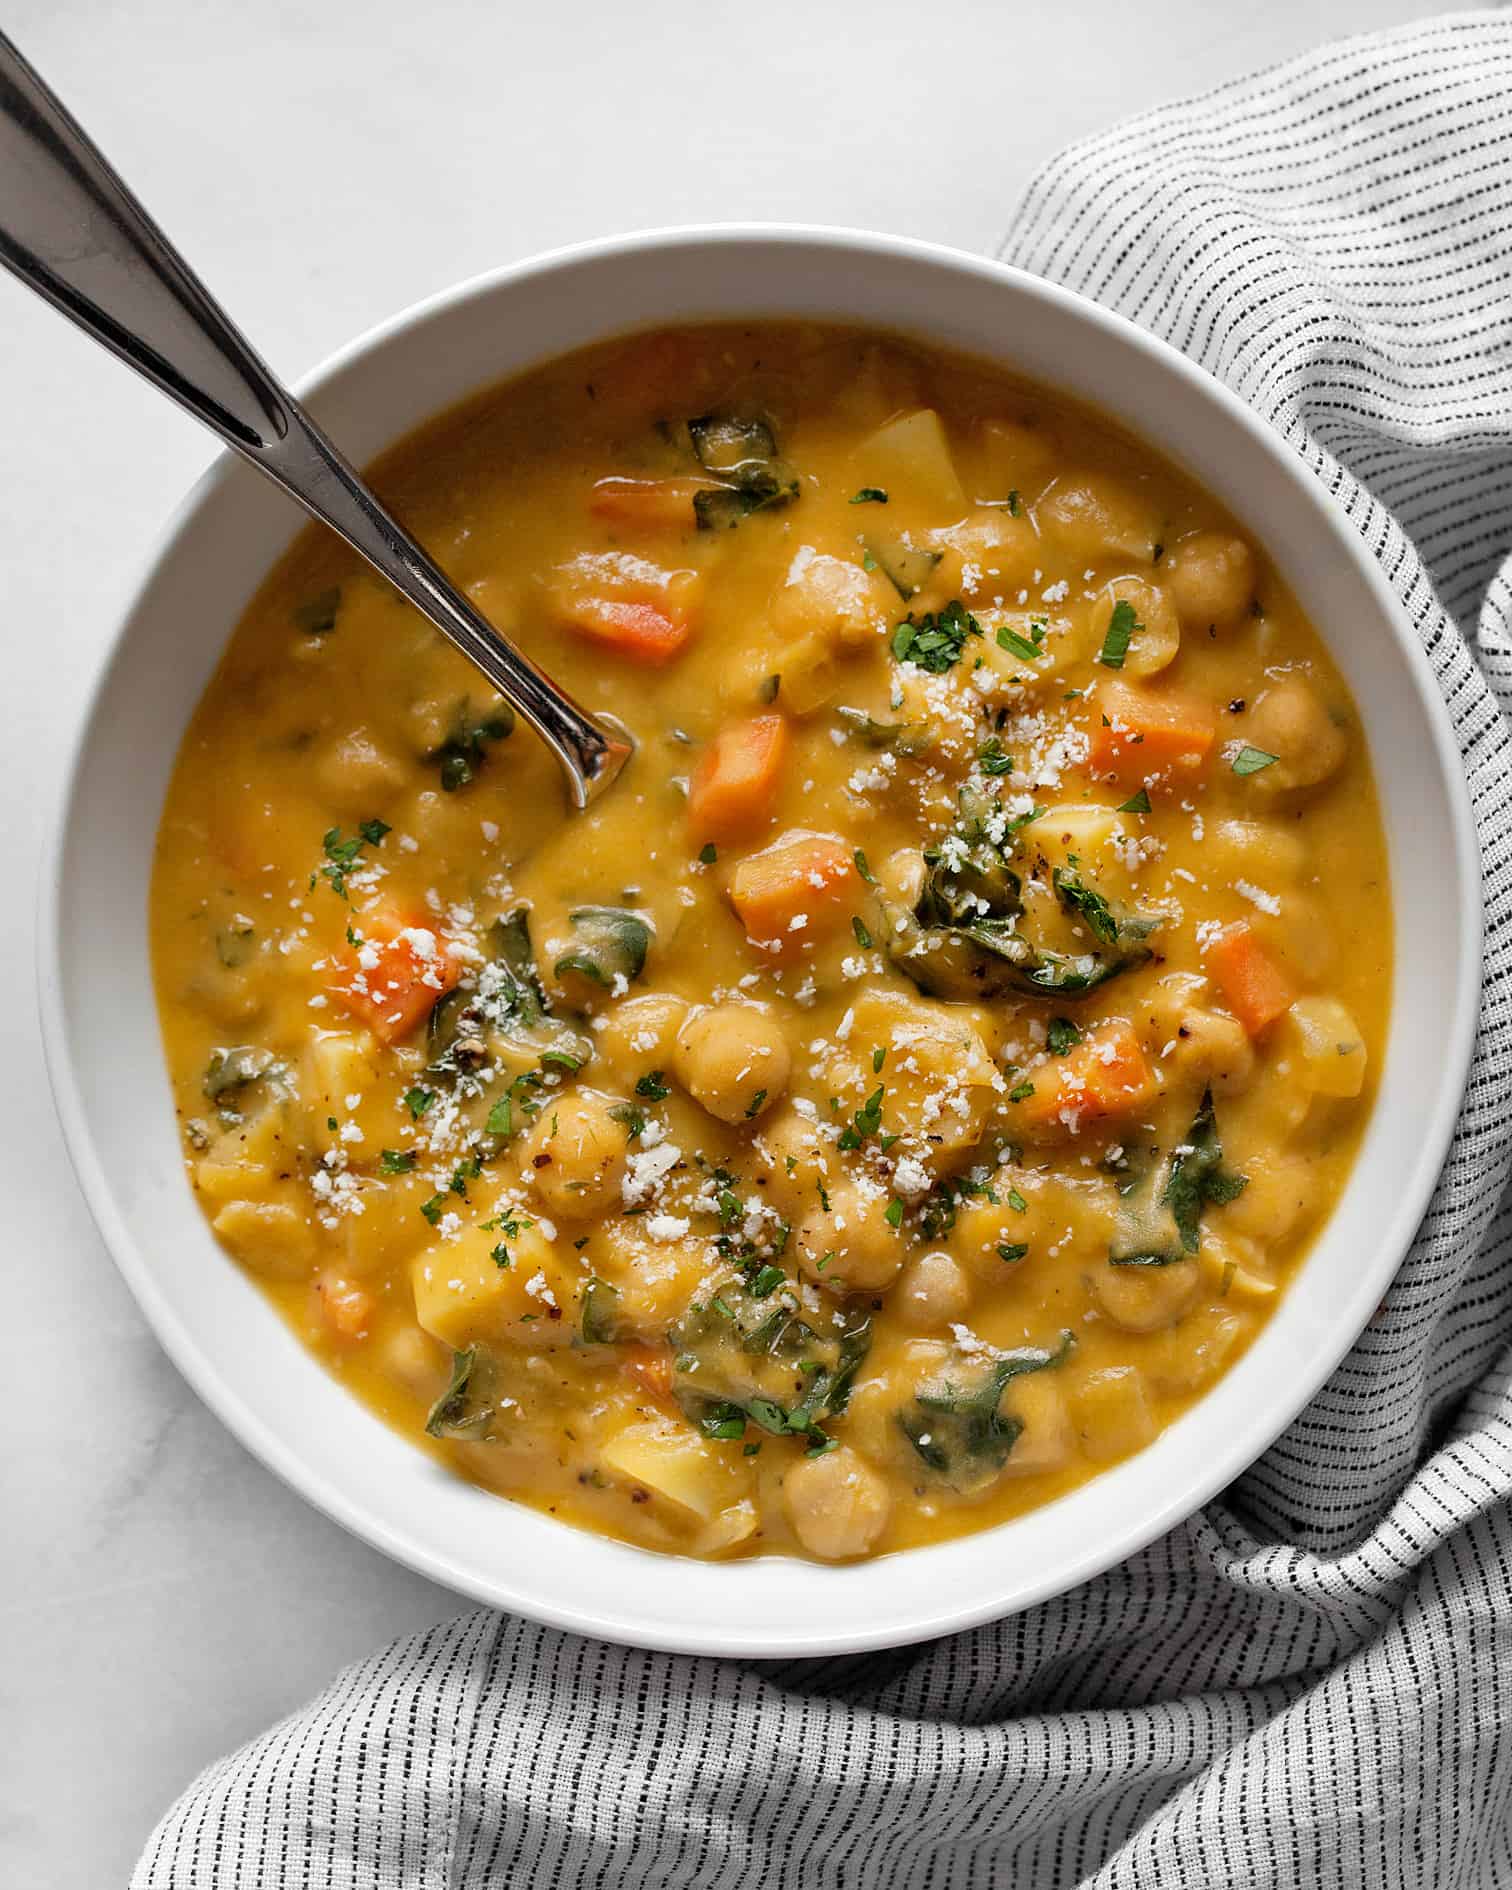 Soup with garbanzo beans and carrots in a bowl